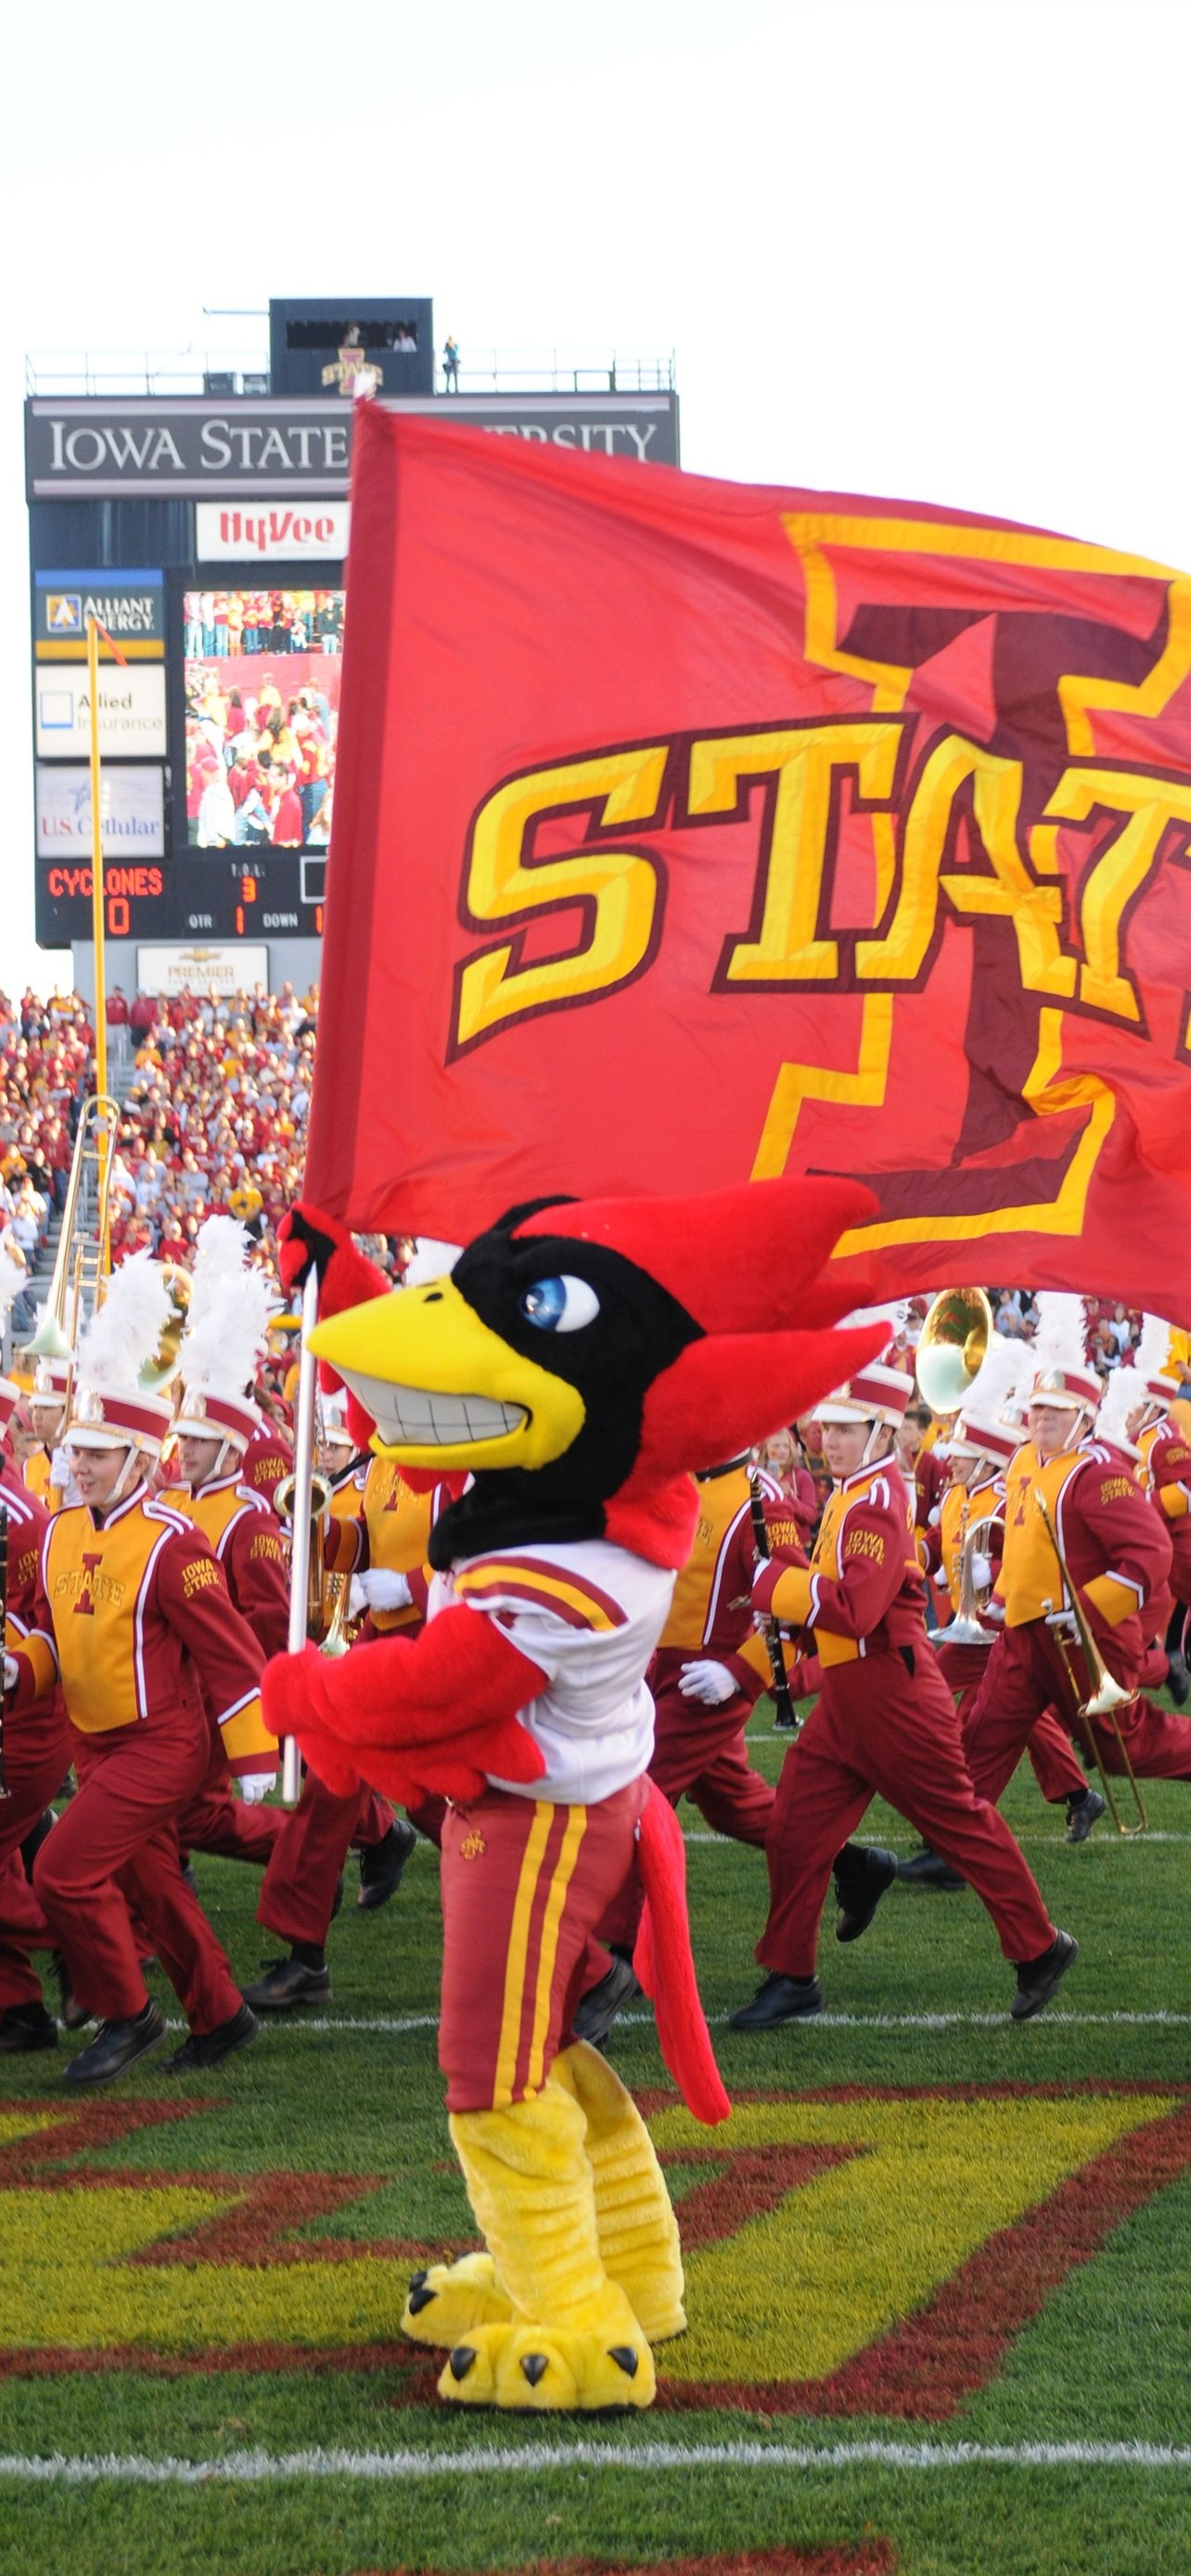 Iowa State, College phone wallpapers, Iowa State University, iPhone backgrounds, 1290x2780 HD Handy